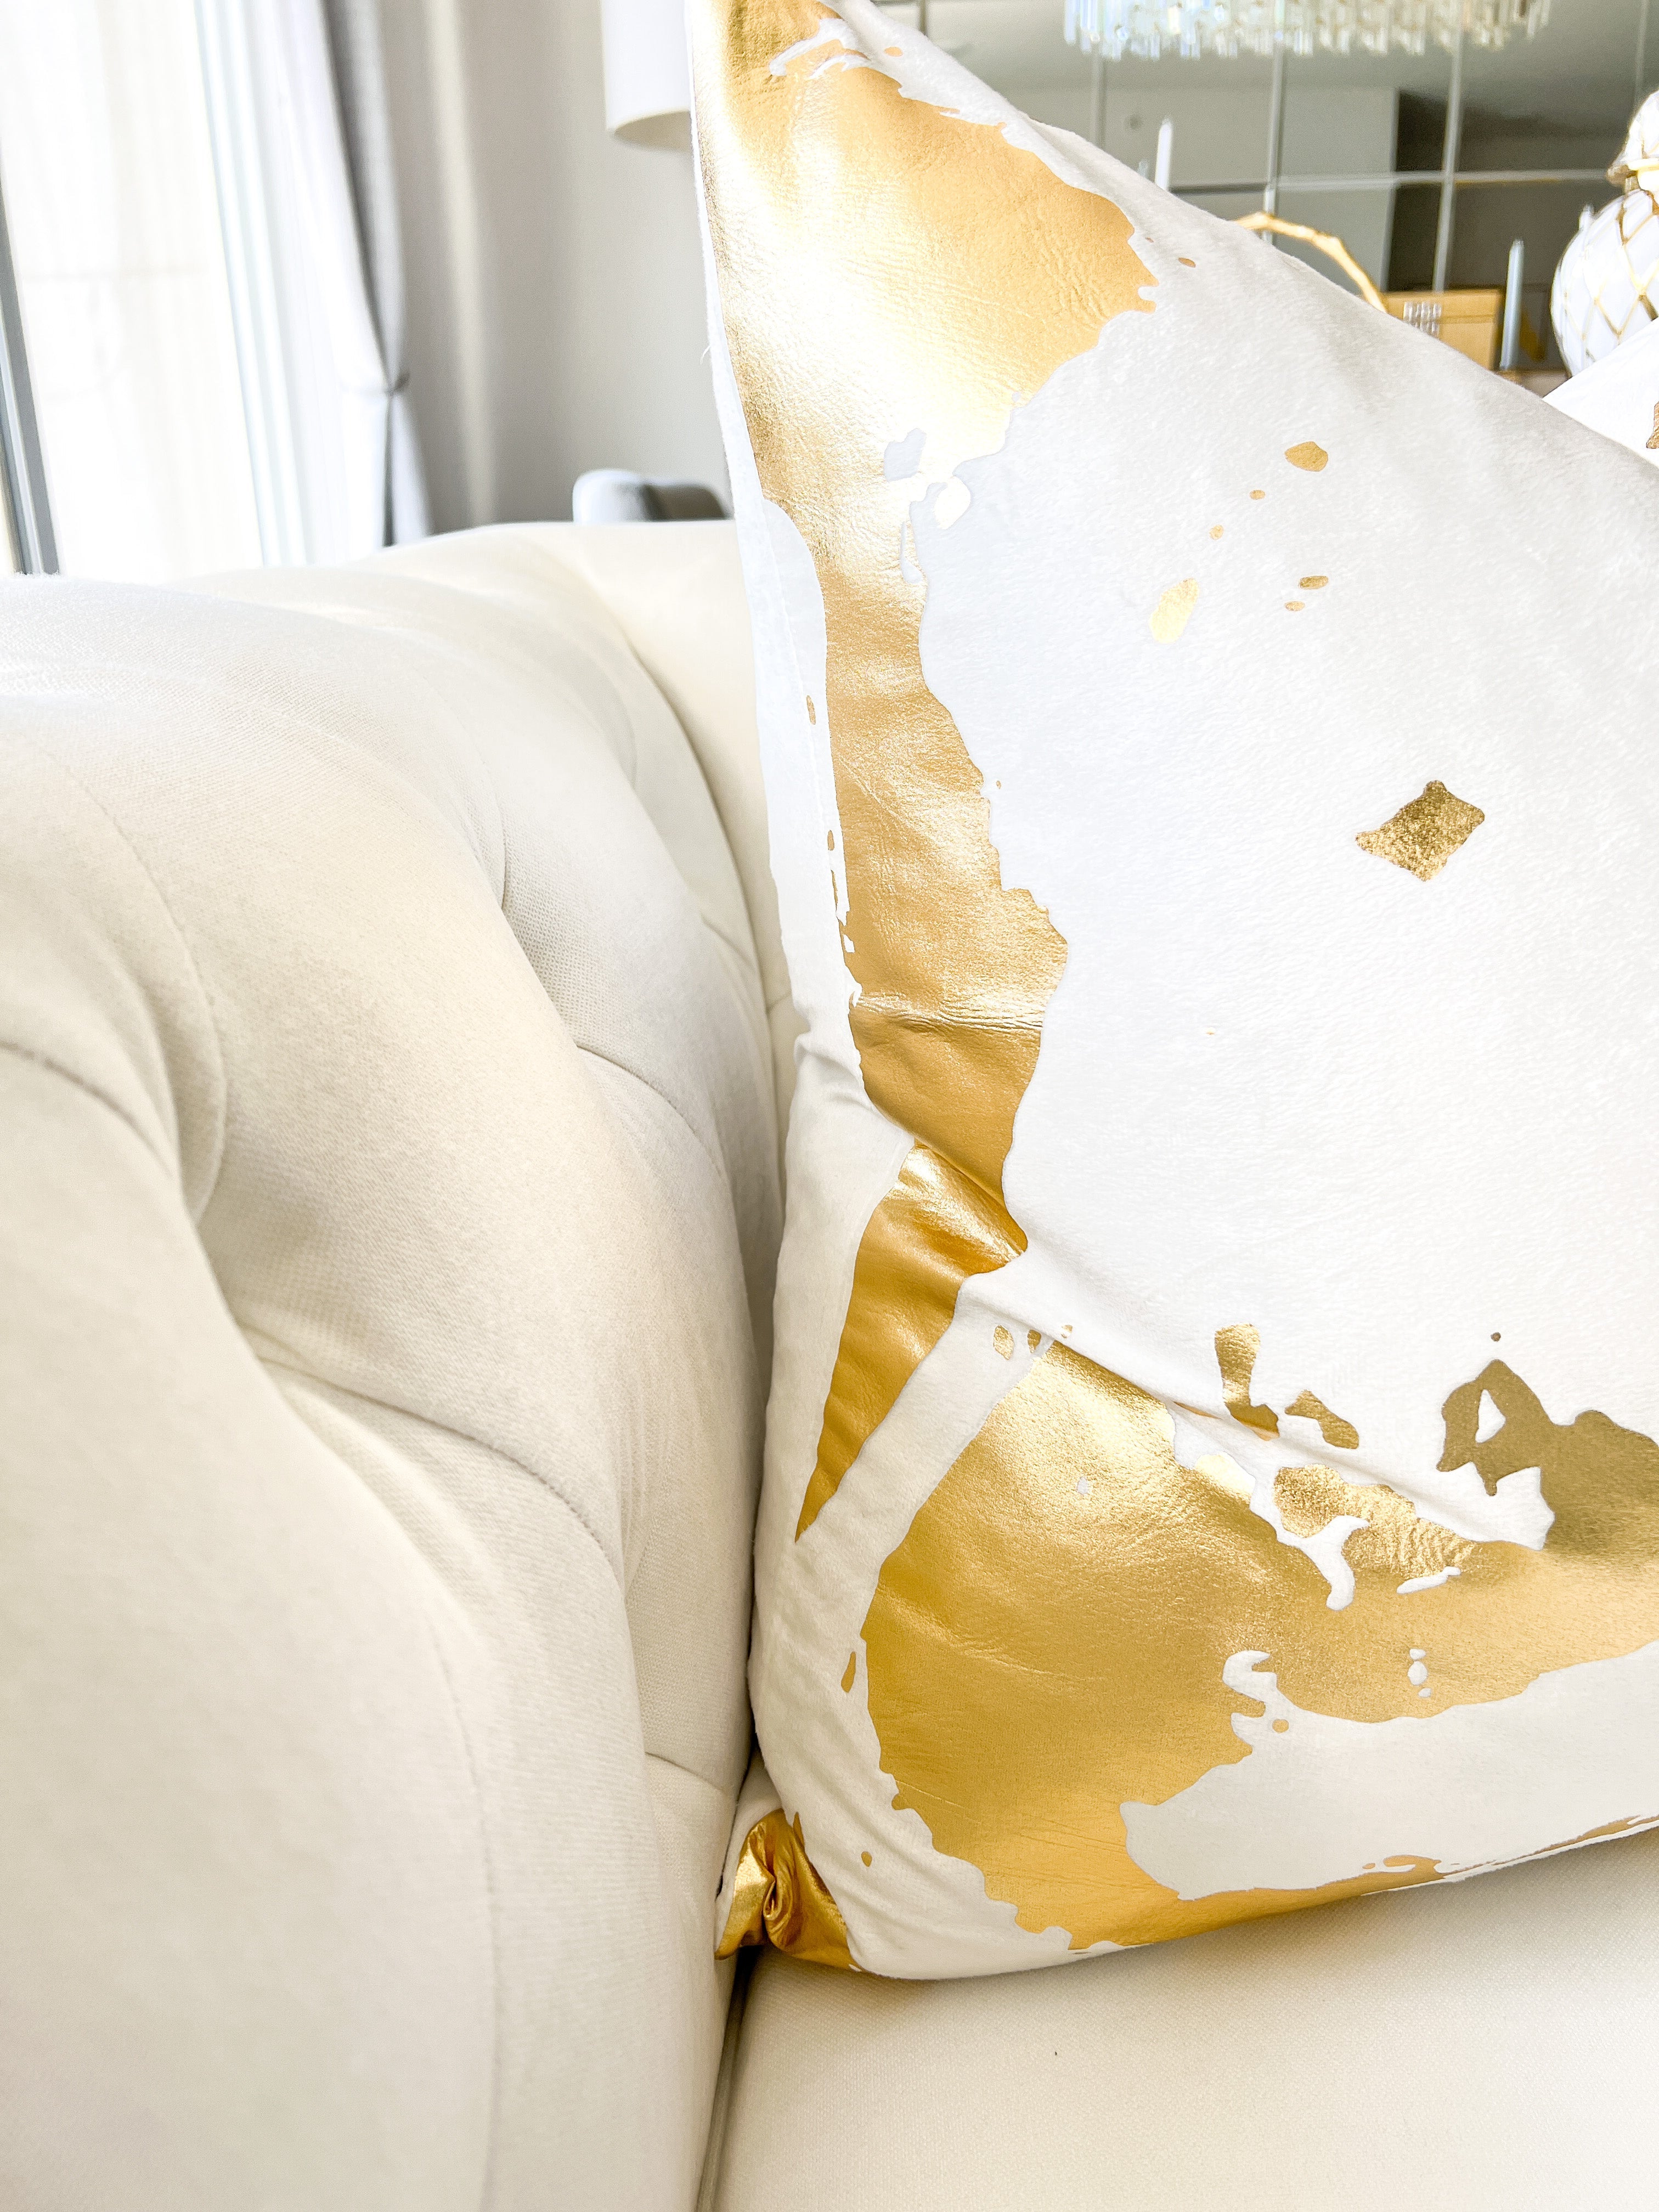 White & Gold Foil Pattern Pillow Cover - HTS HOME DECOR